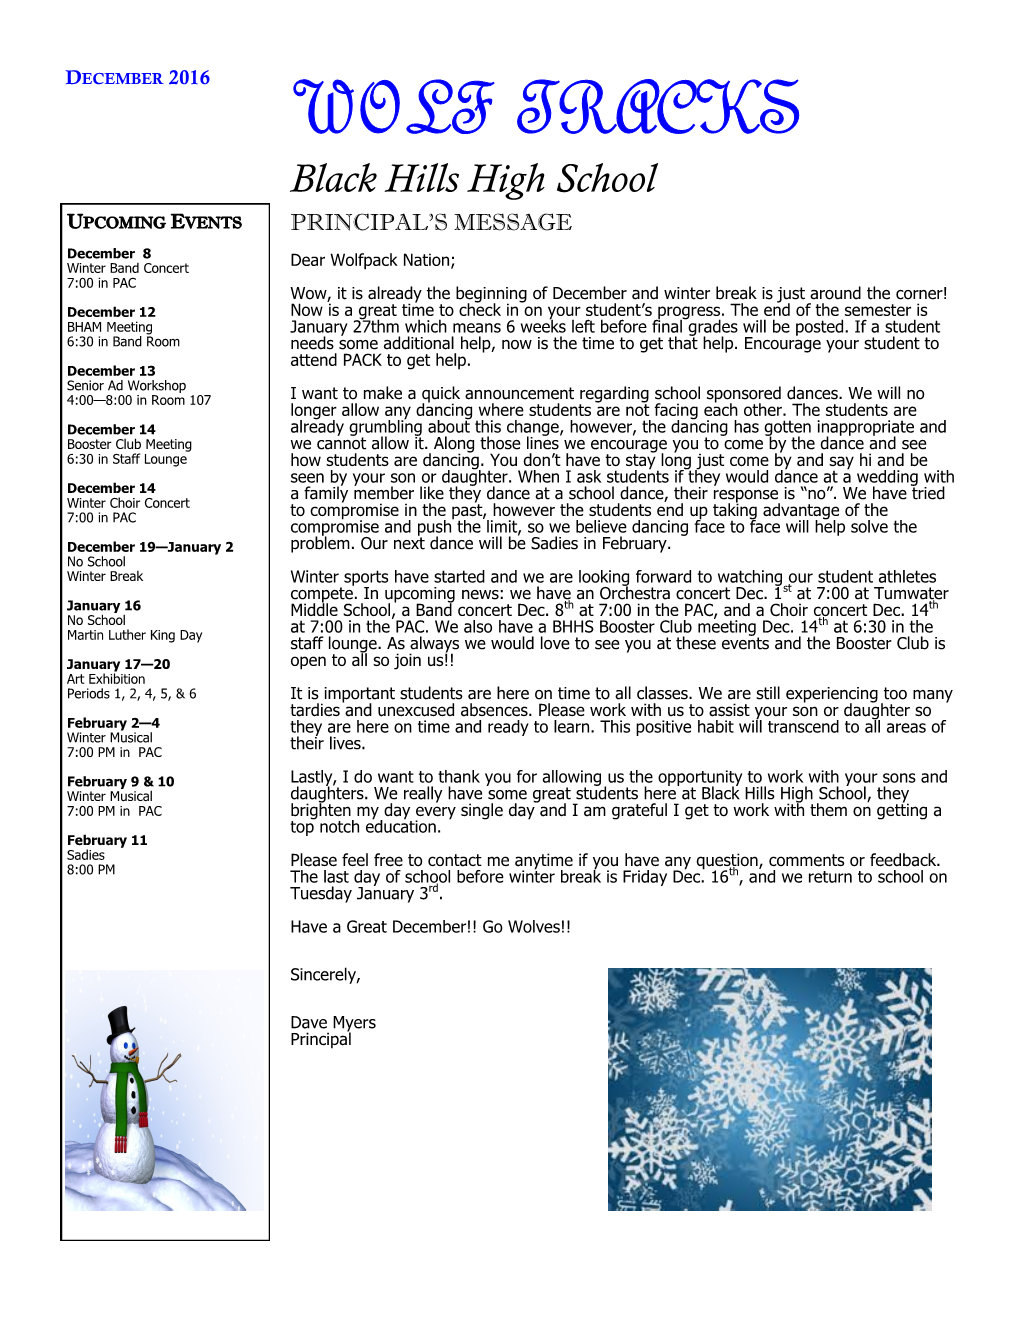 WOLF TRACKS Black Hills High School UPCOMING EVENTS PRINCIPAL’S MESSAGE